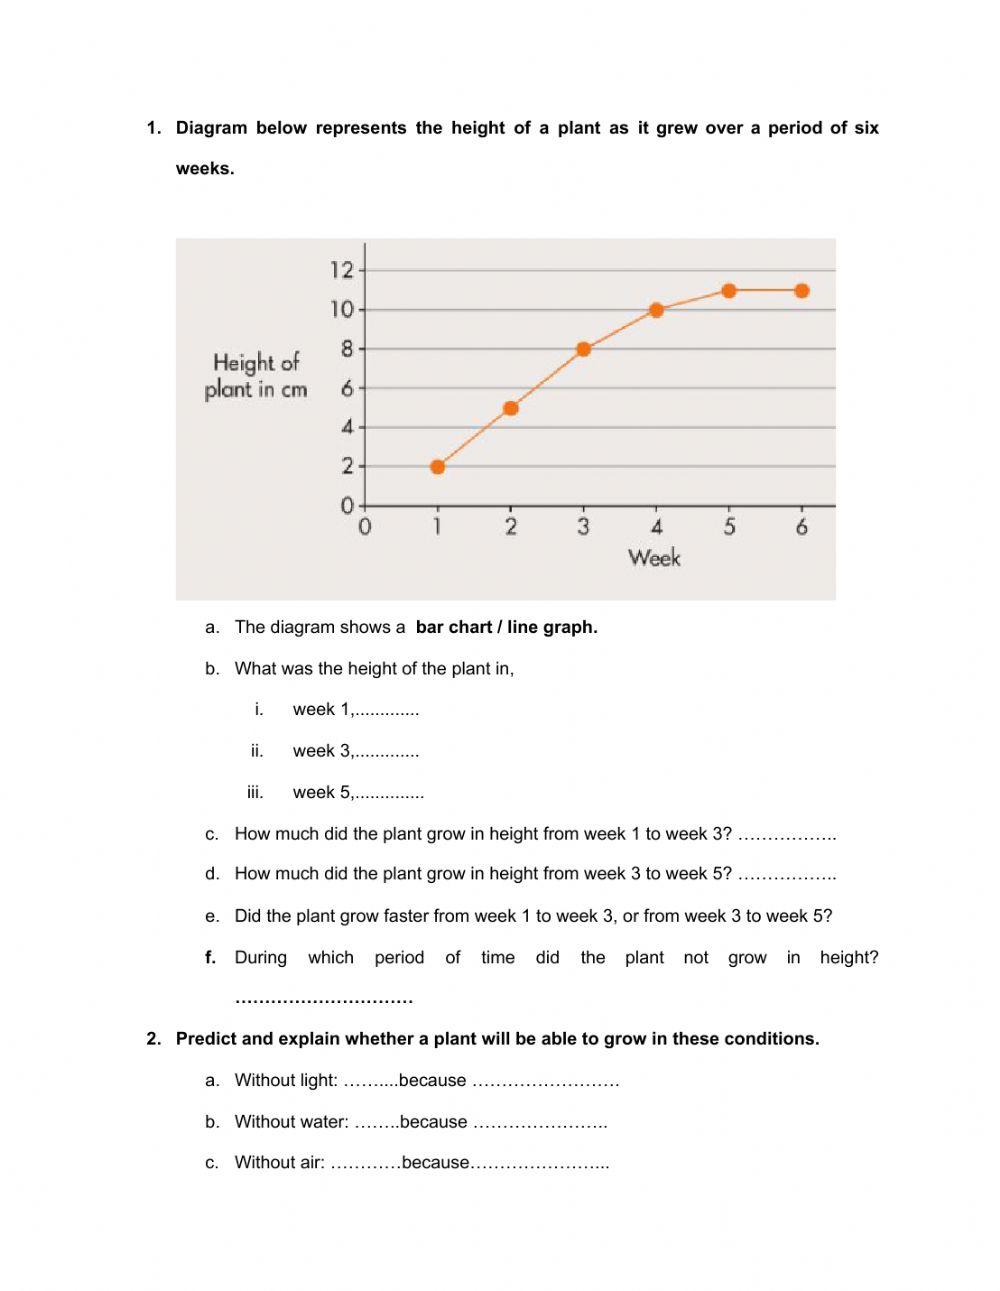 Growth and measurement 2